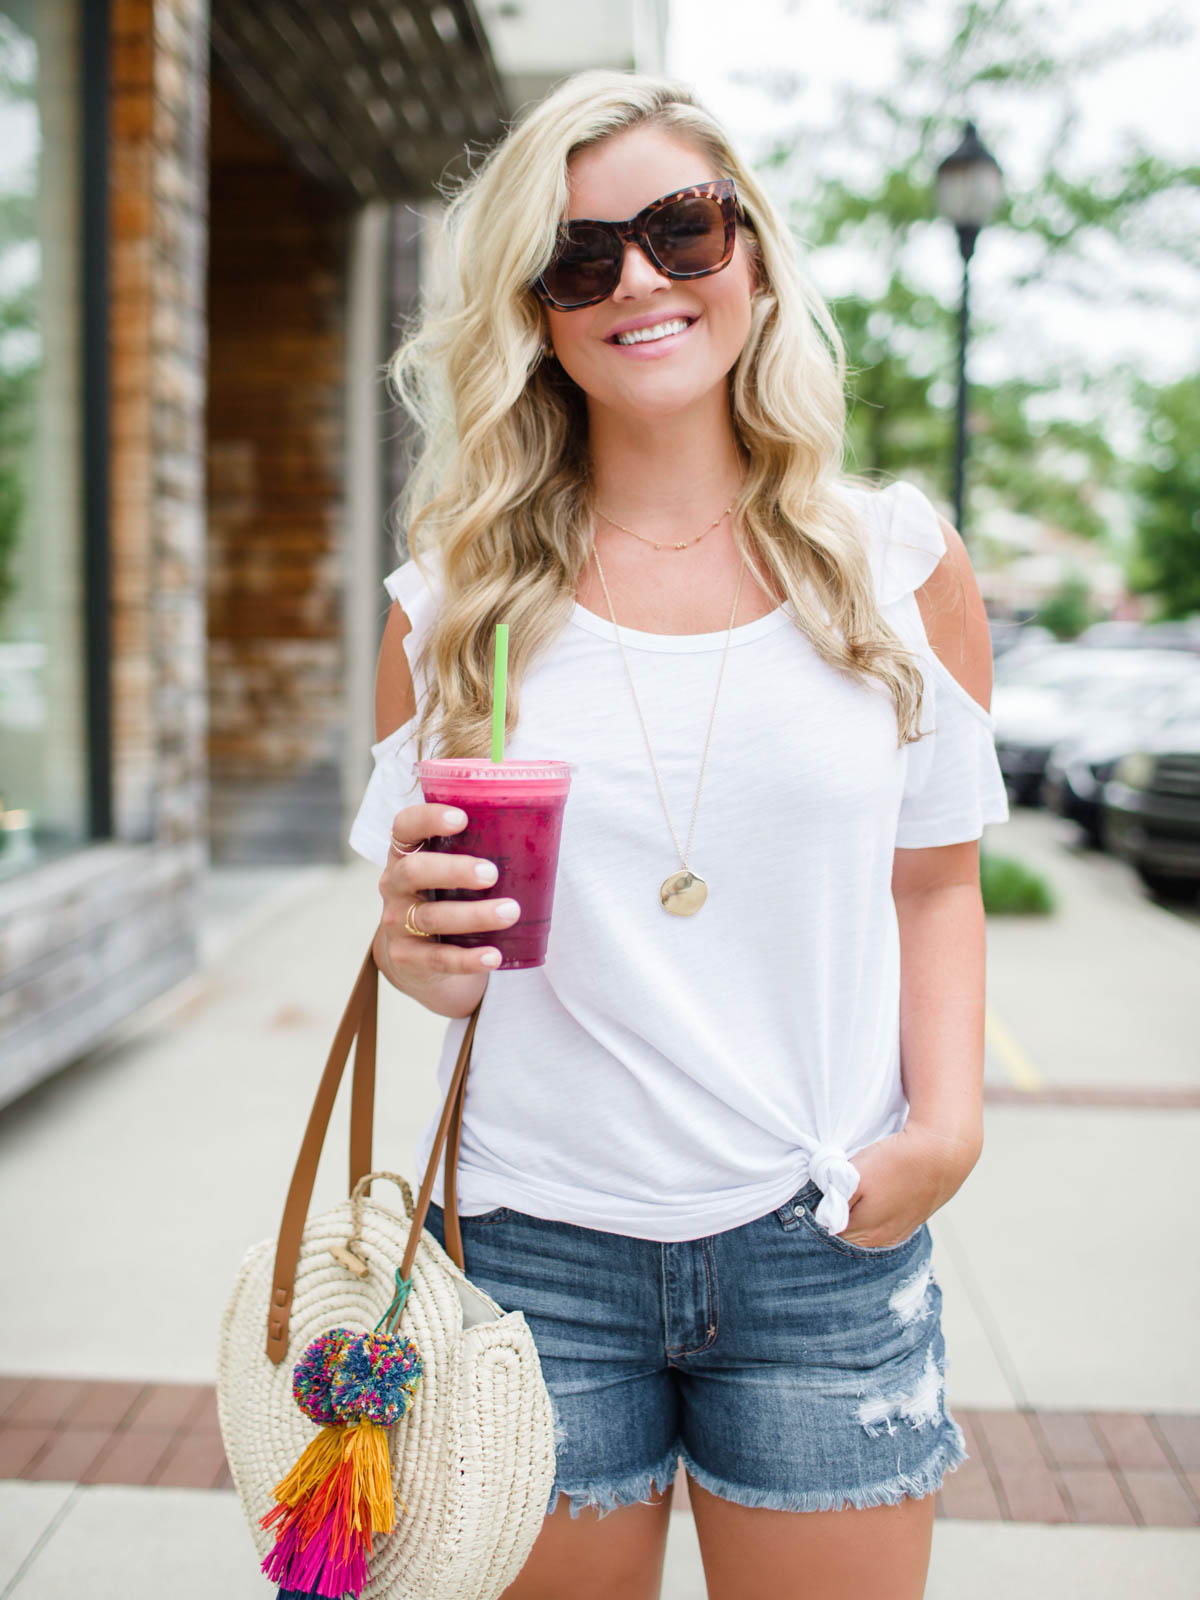 Casual summer outfit inspiration from Style + Beauty Blogger, The Southern Style Guide